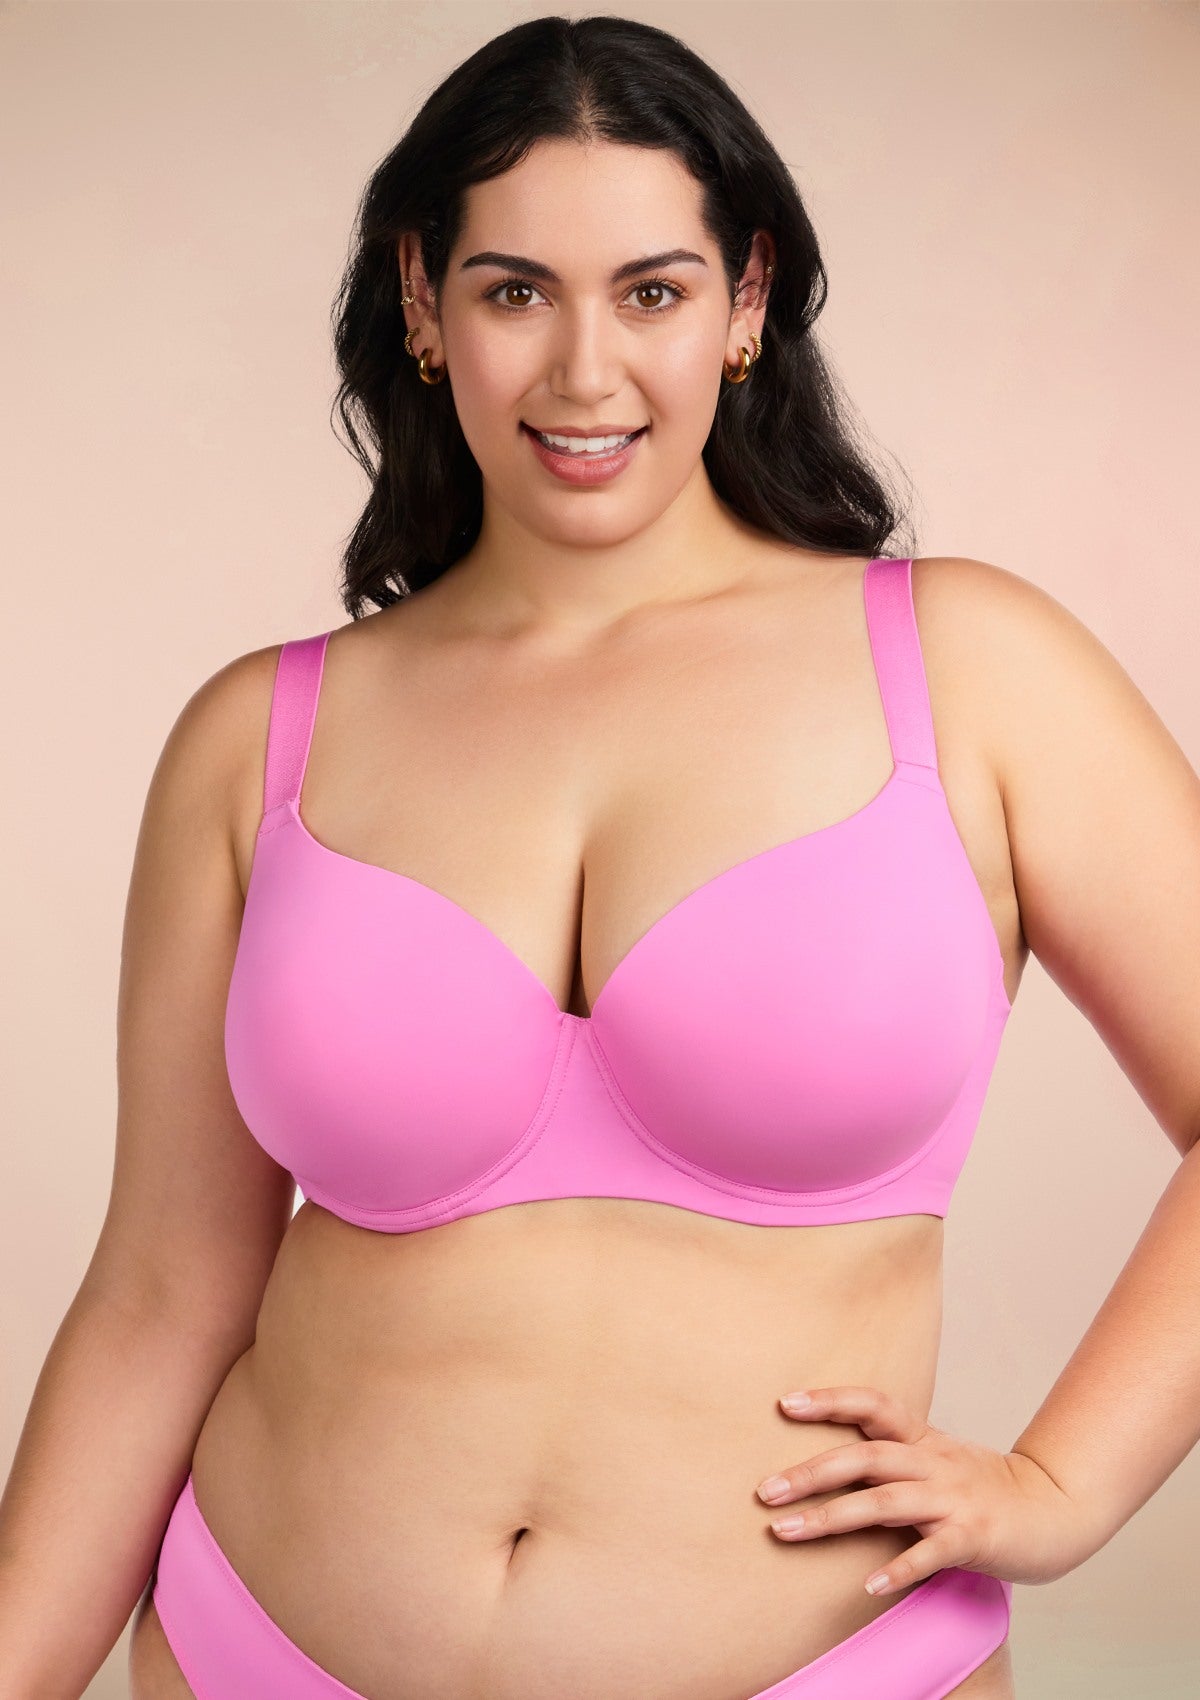 HSIA Gemma Smooth Lightly Padded T-shirt Bra For Heavy Breasts - Pink / 34 / D